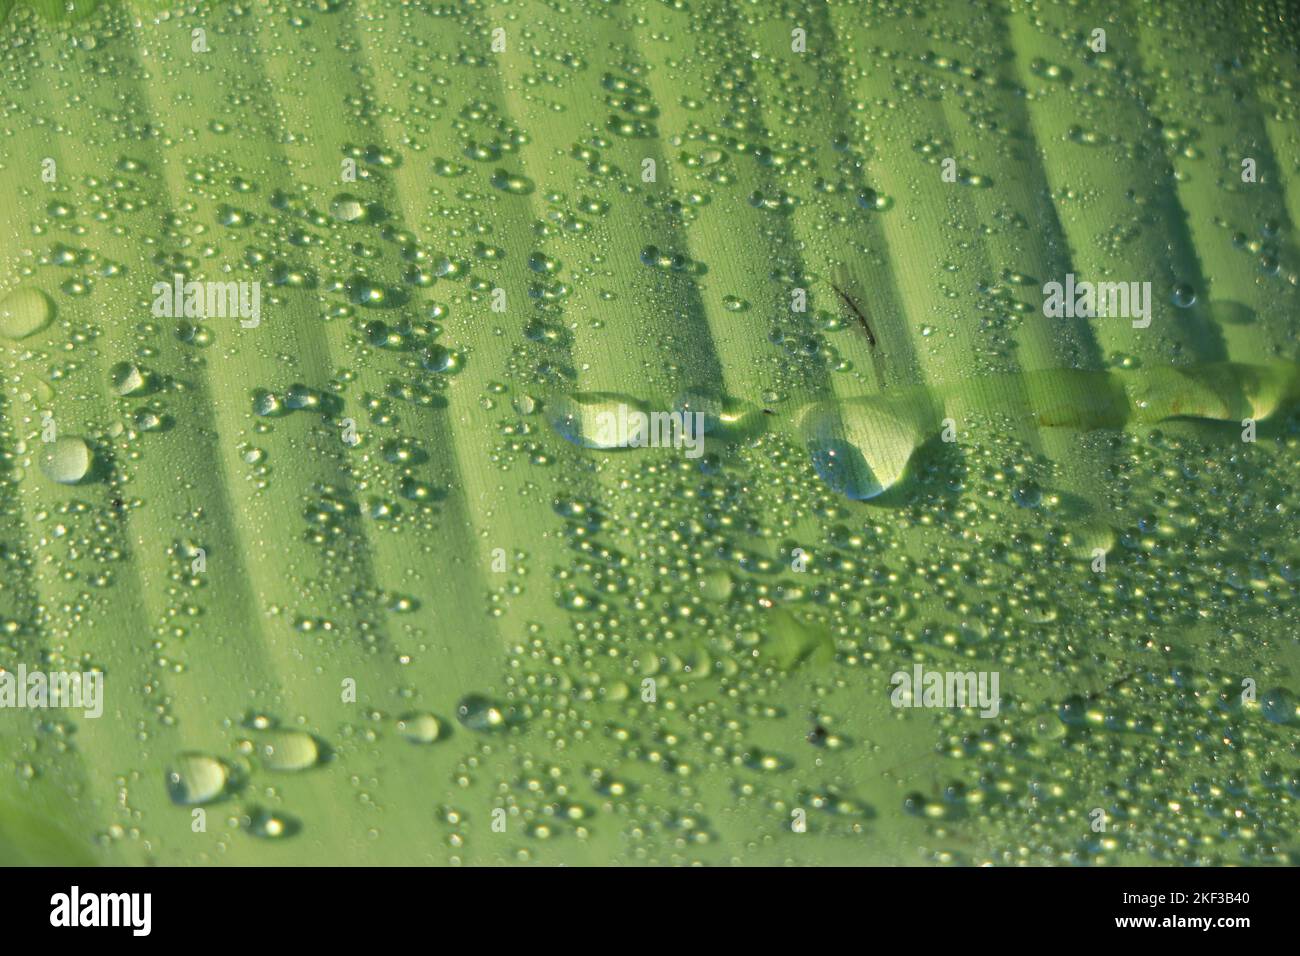 water drop on banana leaf background Stock Photo